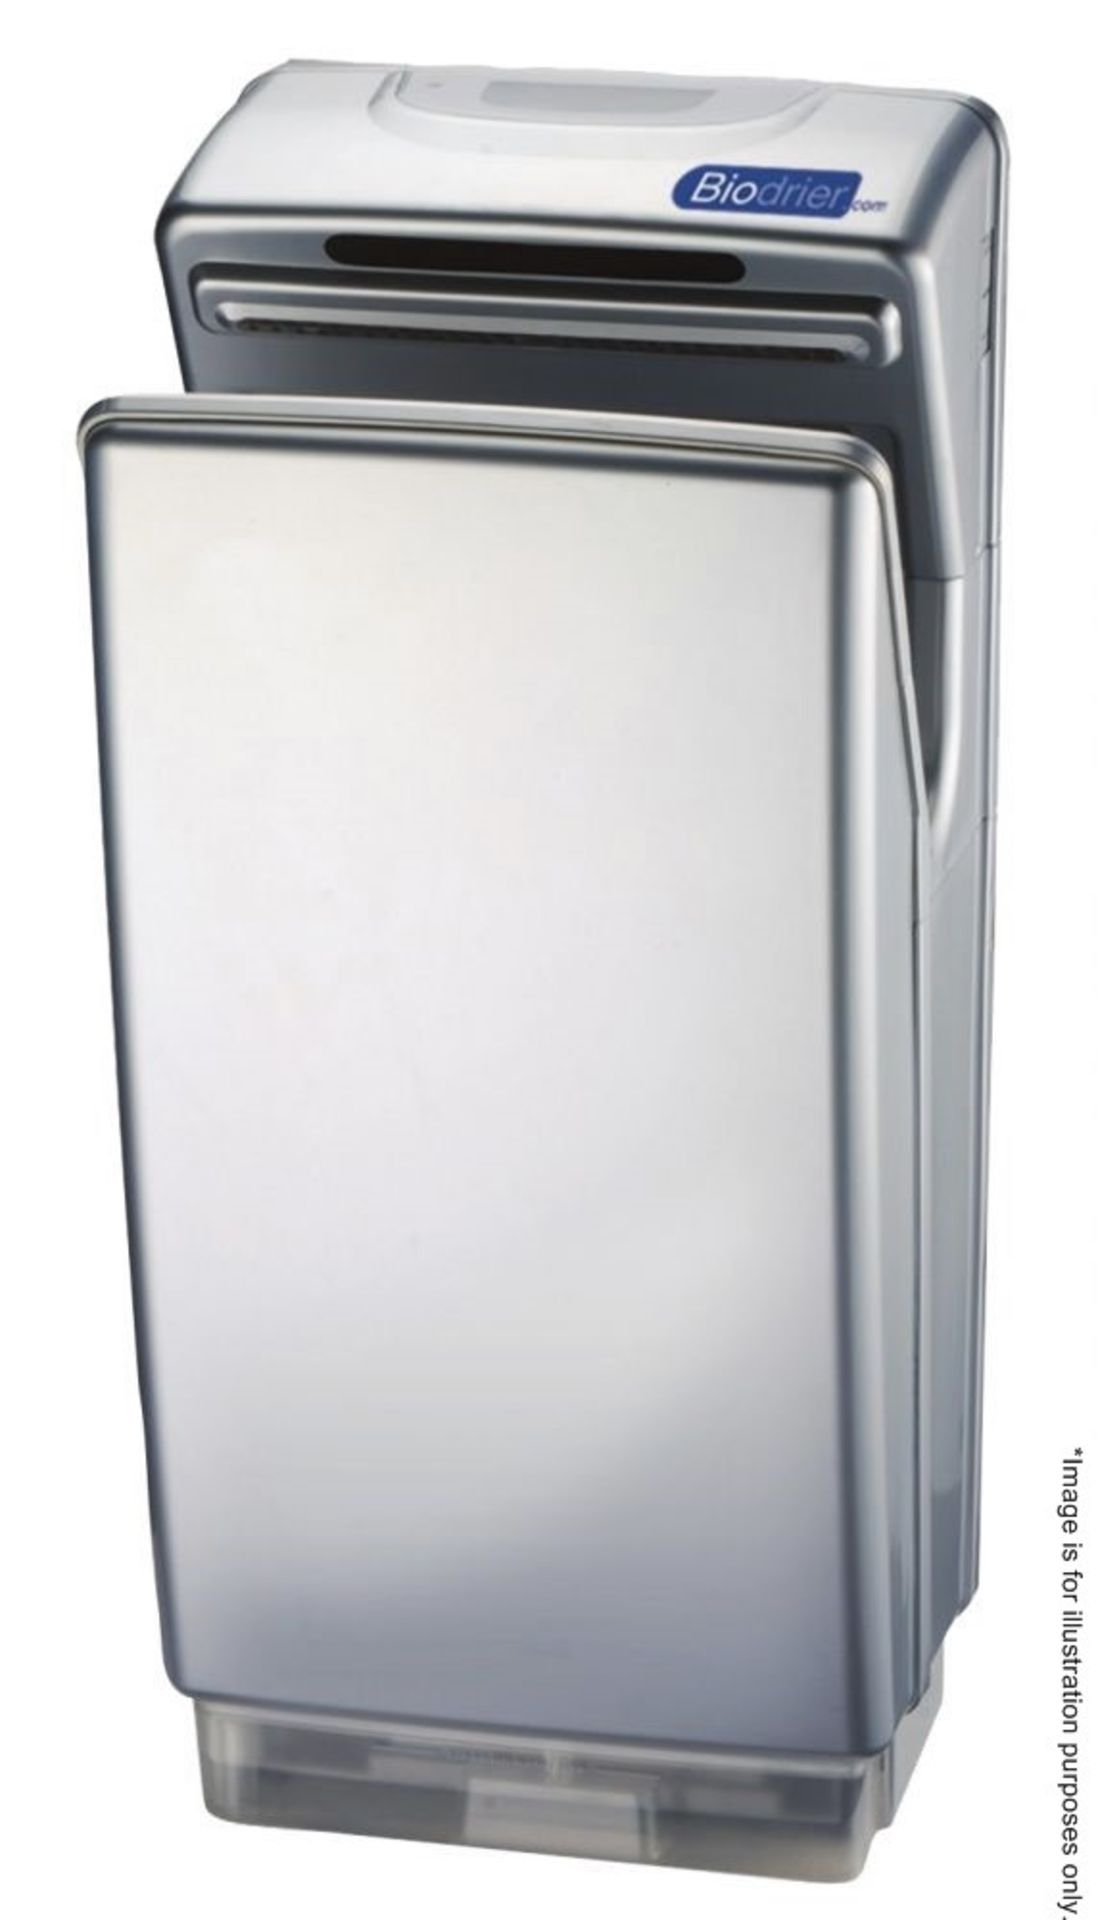 1 x BIODRIER Business Automatic Hand Dryer In Silver - Model: BB70S - Used